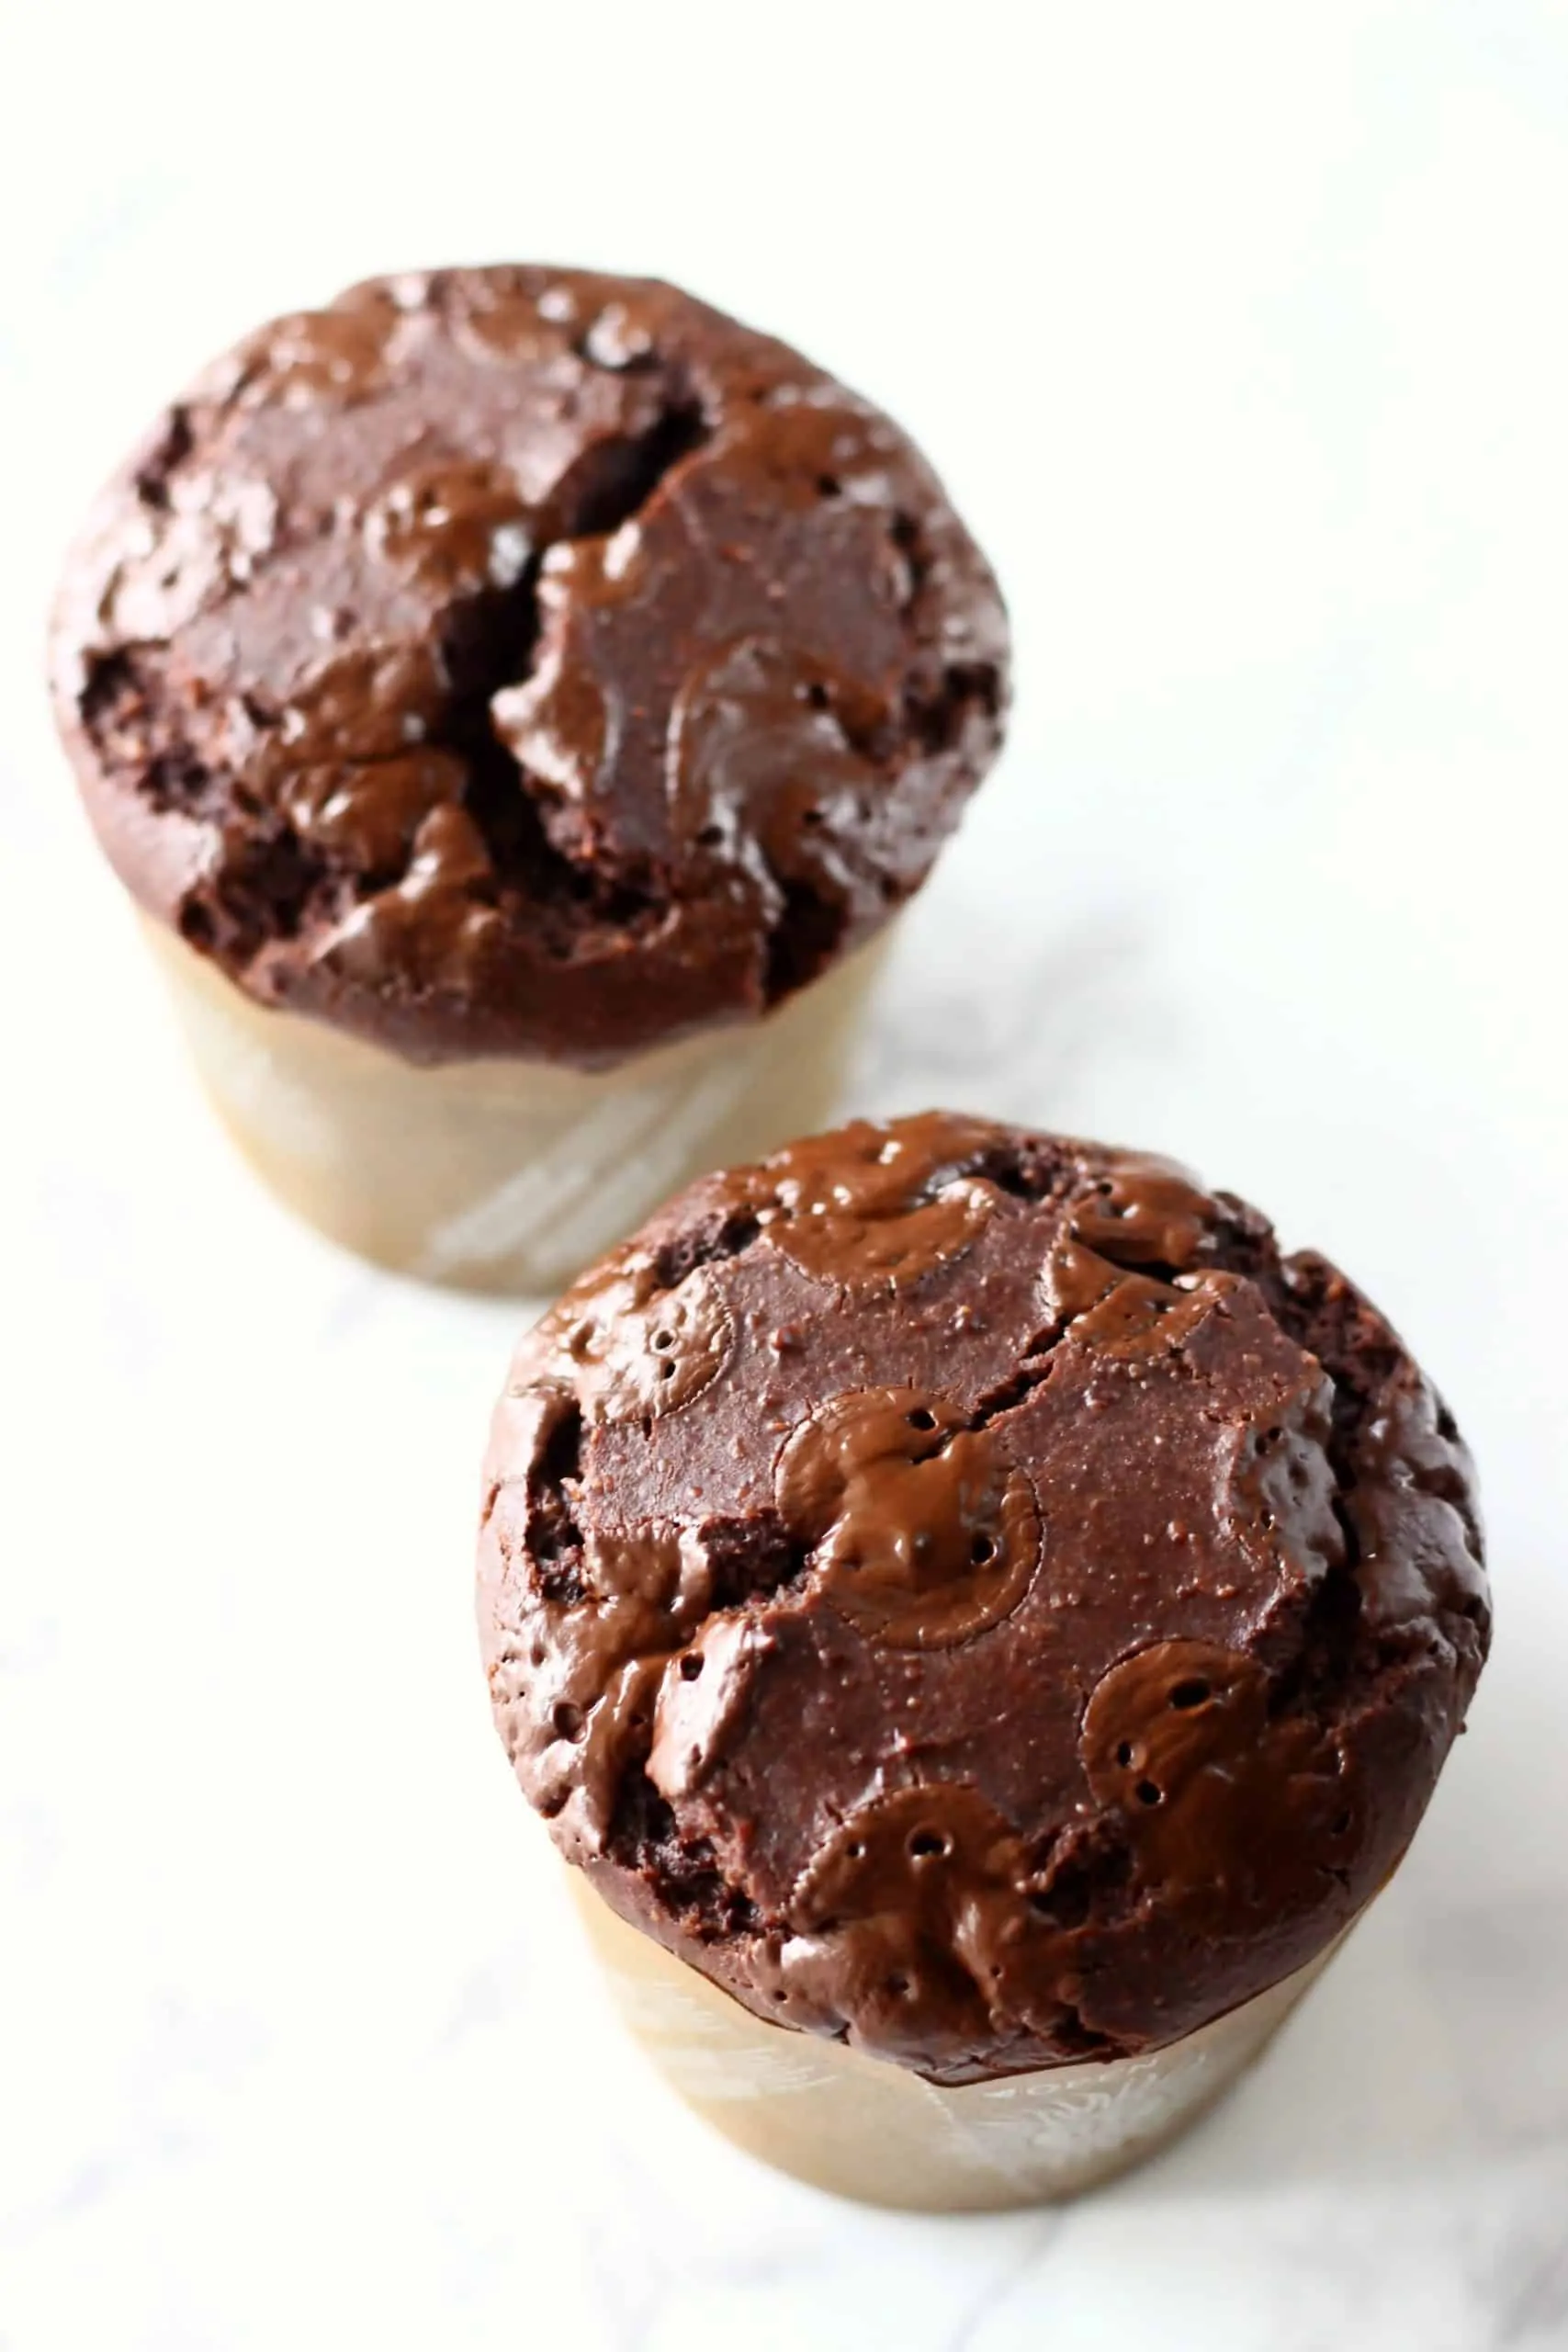 Two gluten-free vegan chocolate muffins in brown muffin cases topped with chocolate chips